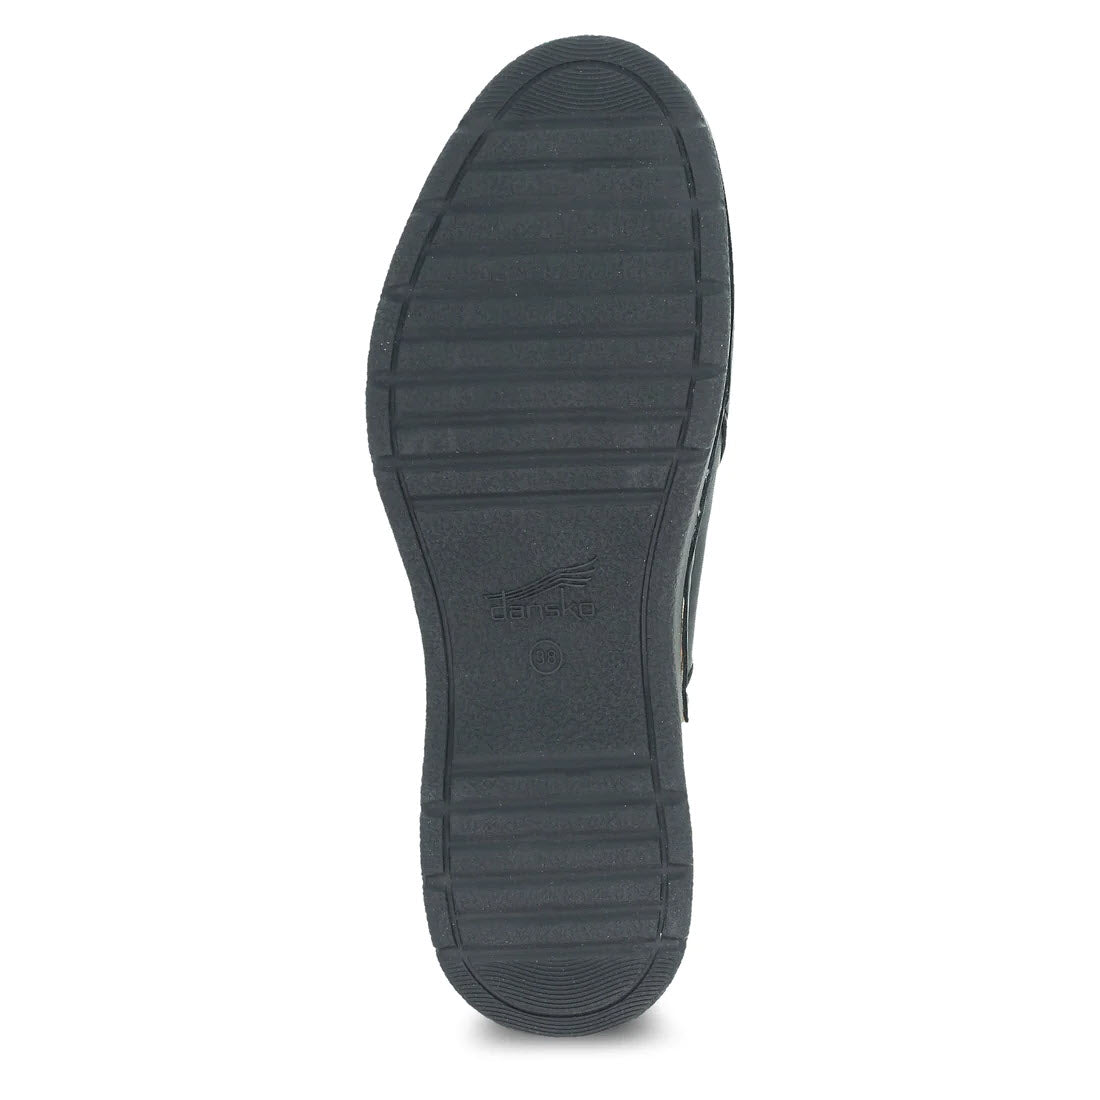 Bottom view of a Dansko shoe showing a textured sole with a brand logo &quot;Ravyn&quot; embossed in the center.